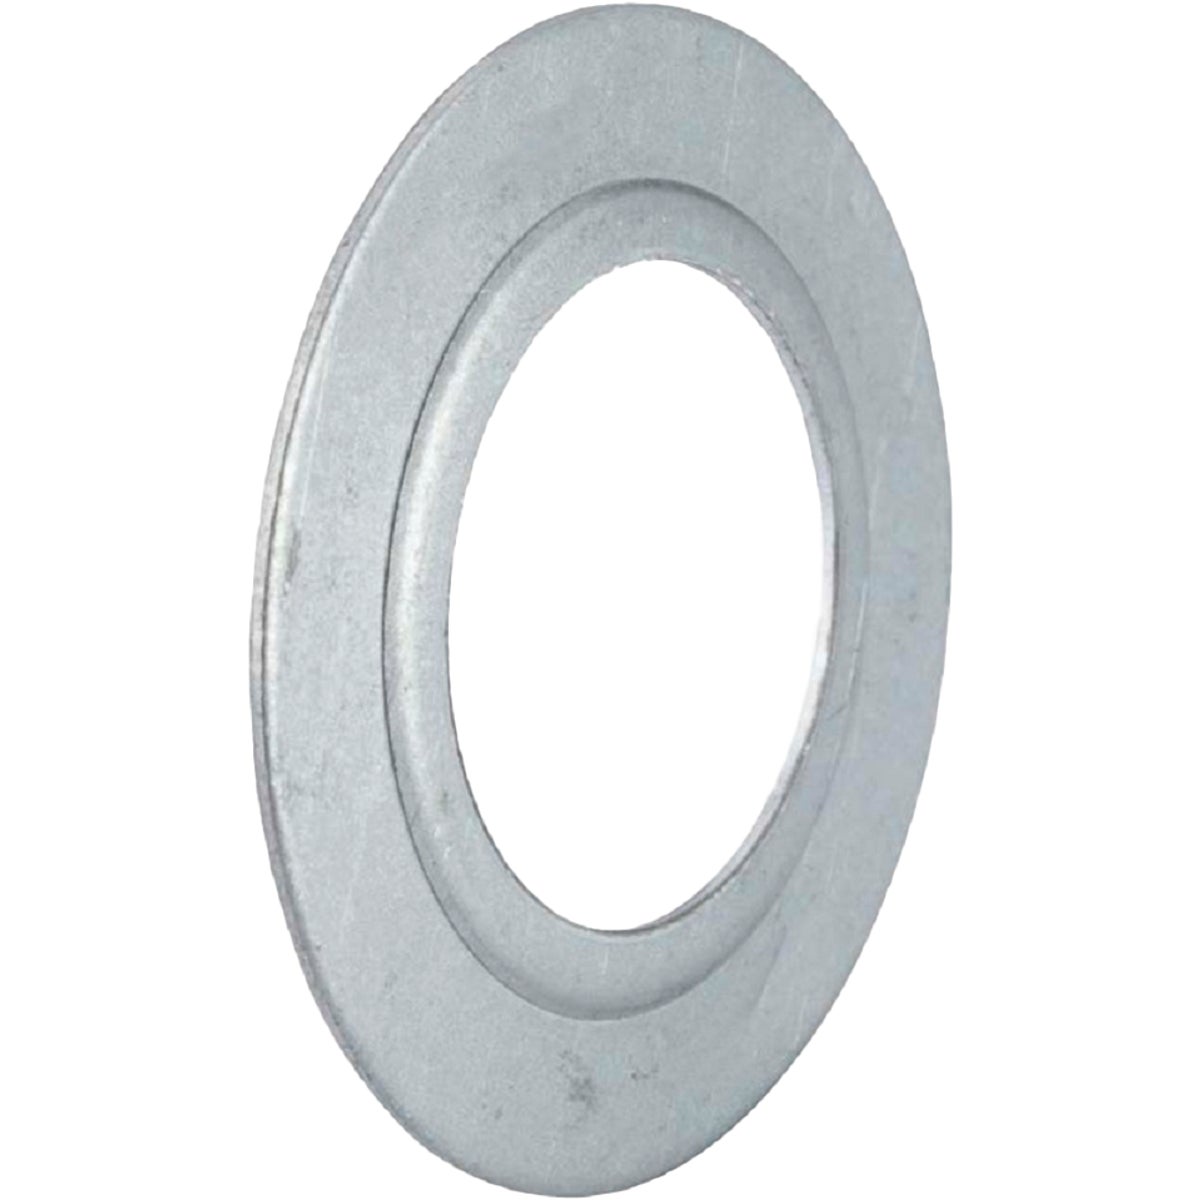 Halex 1-1/2 In. to 1-1/4 In. Plated Steel Rigid Reducing Washer (100-Pack)